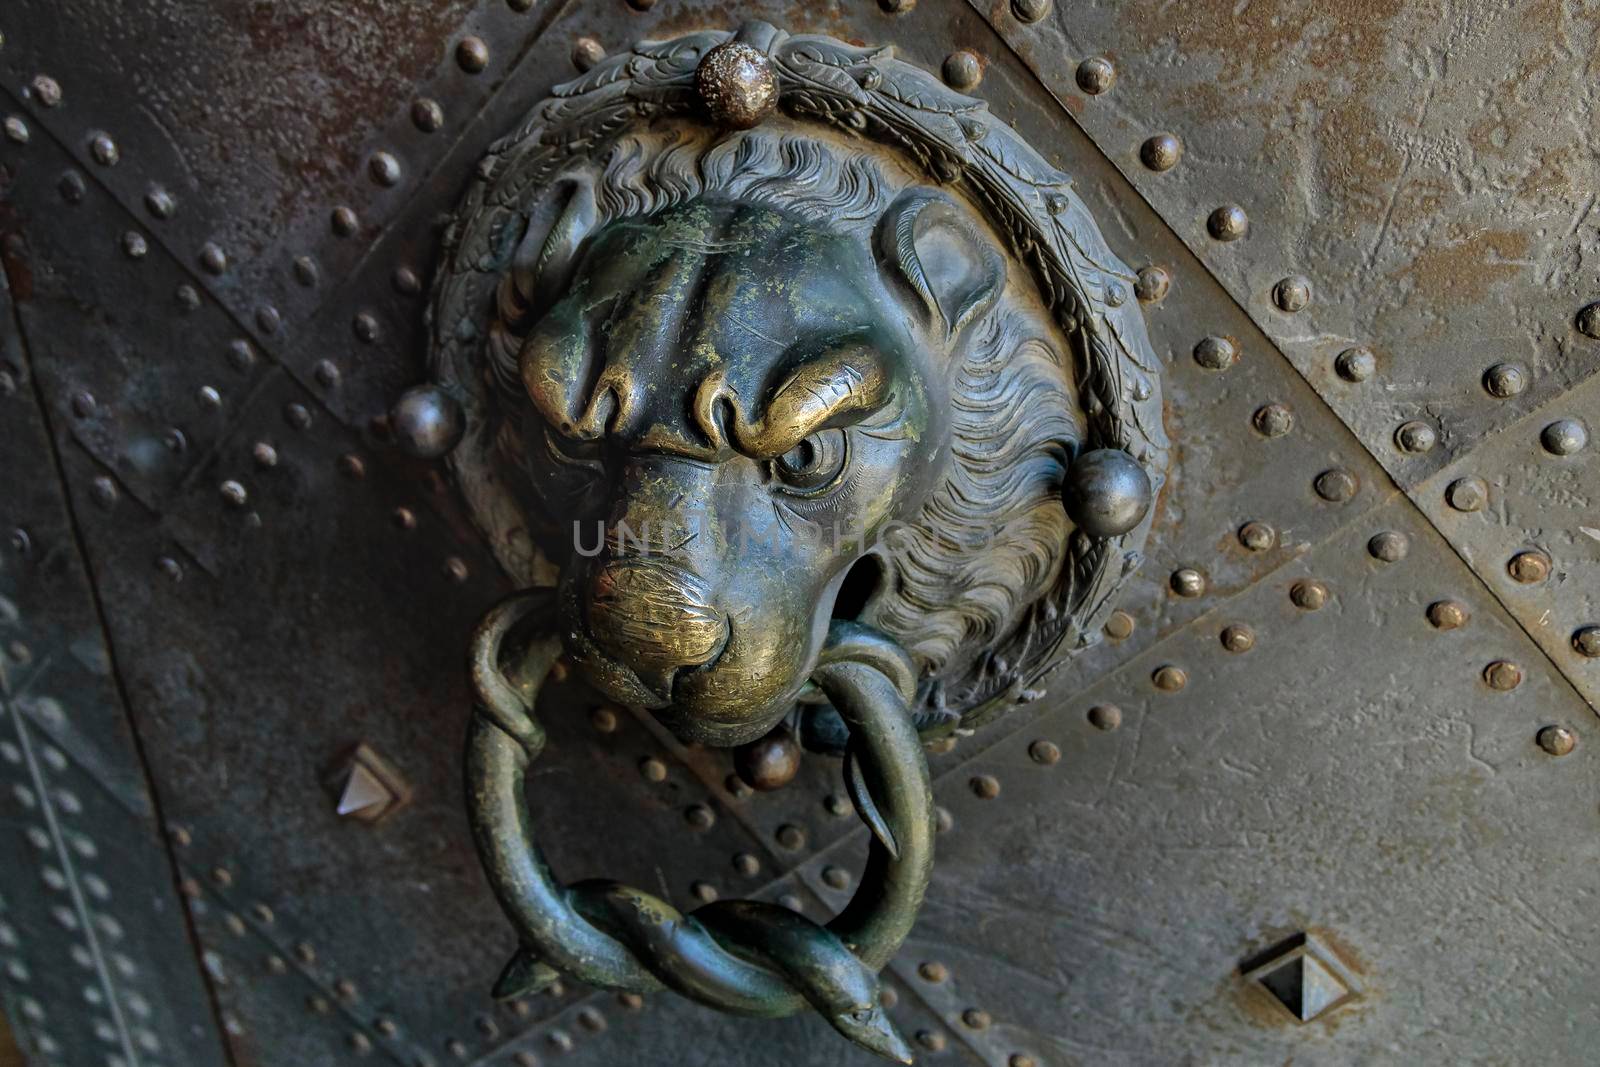 The old metal handle on the iron door is made in the form of a lion's head